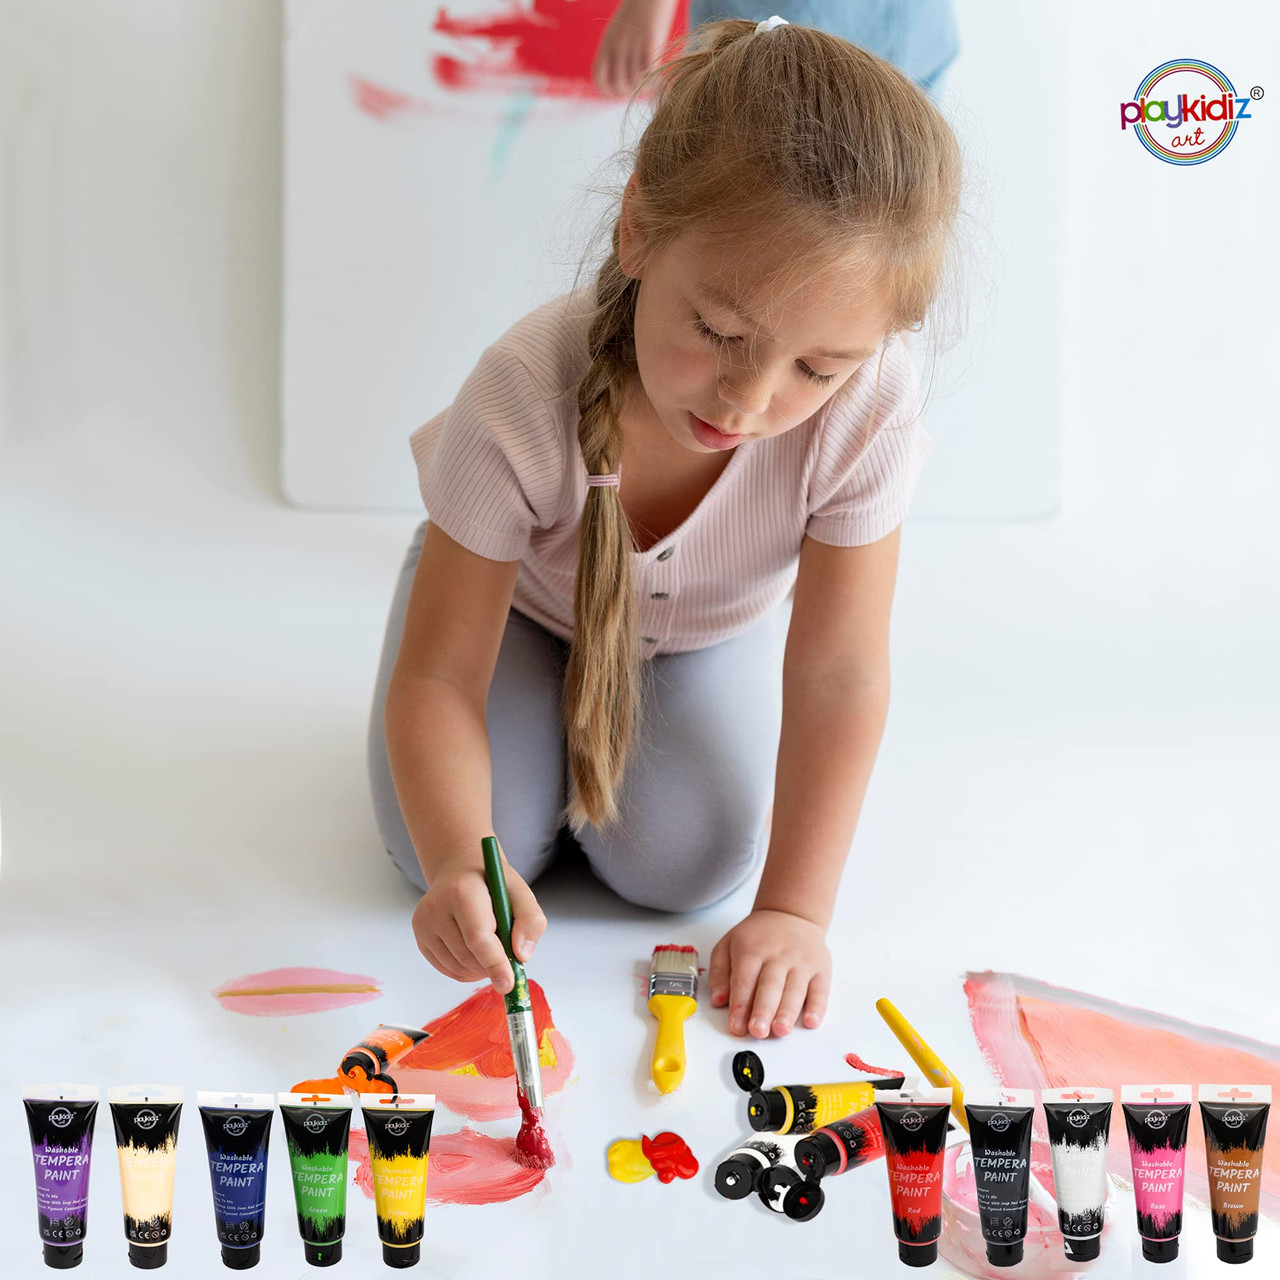 How to Make Non-Toxic Paint for Kids